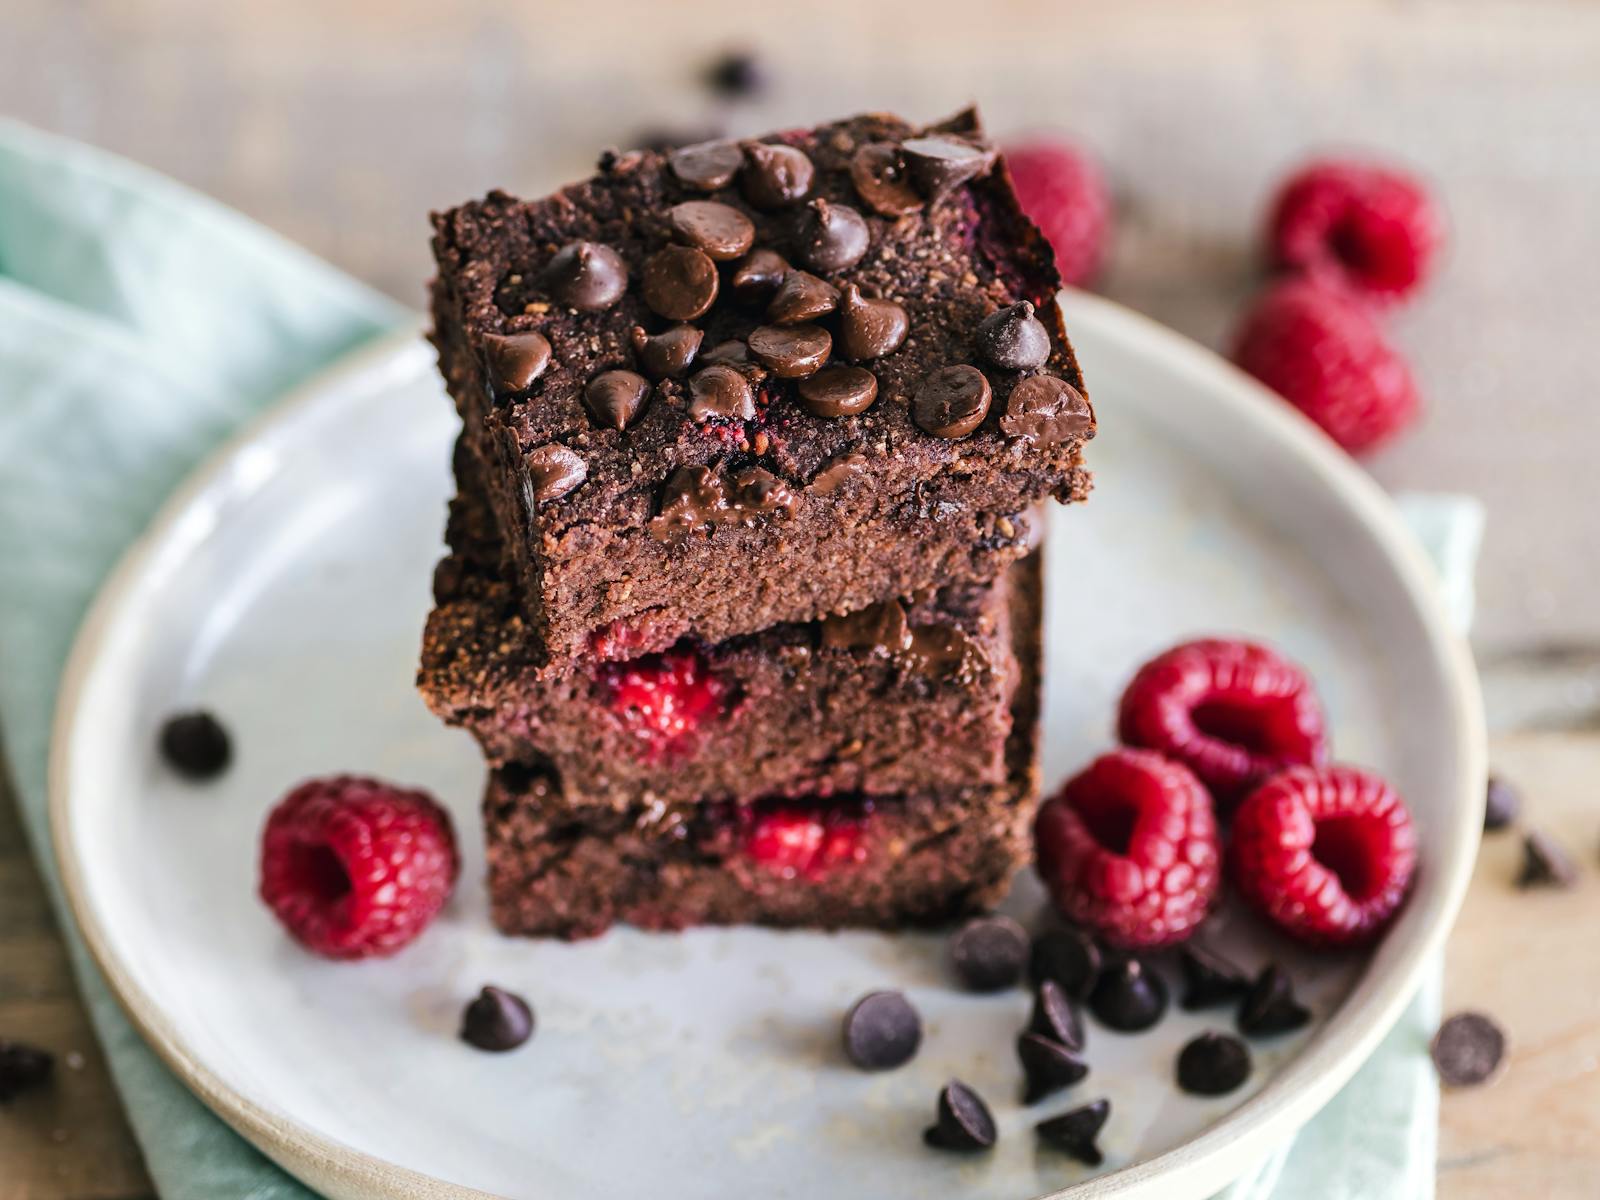 Indulge in these delicious vegan brownies, made with simple pantry ingredients. So moist and fudgy, you won't believe they're egg-free! Recipe by simply-recipes.